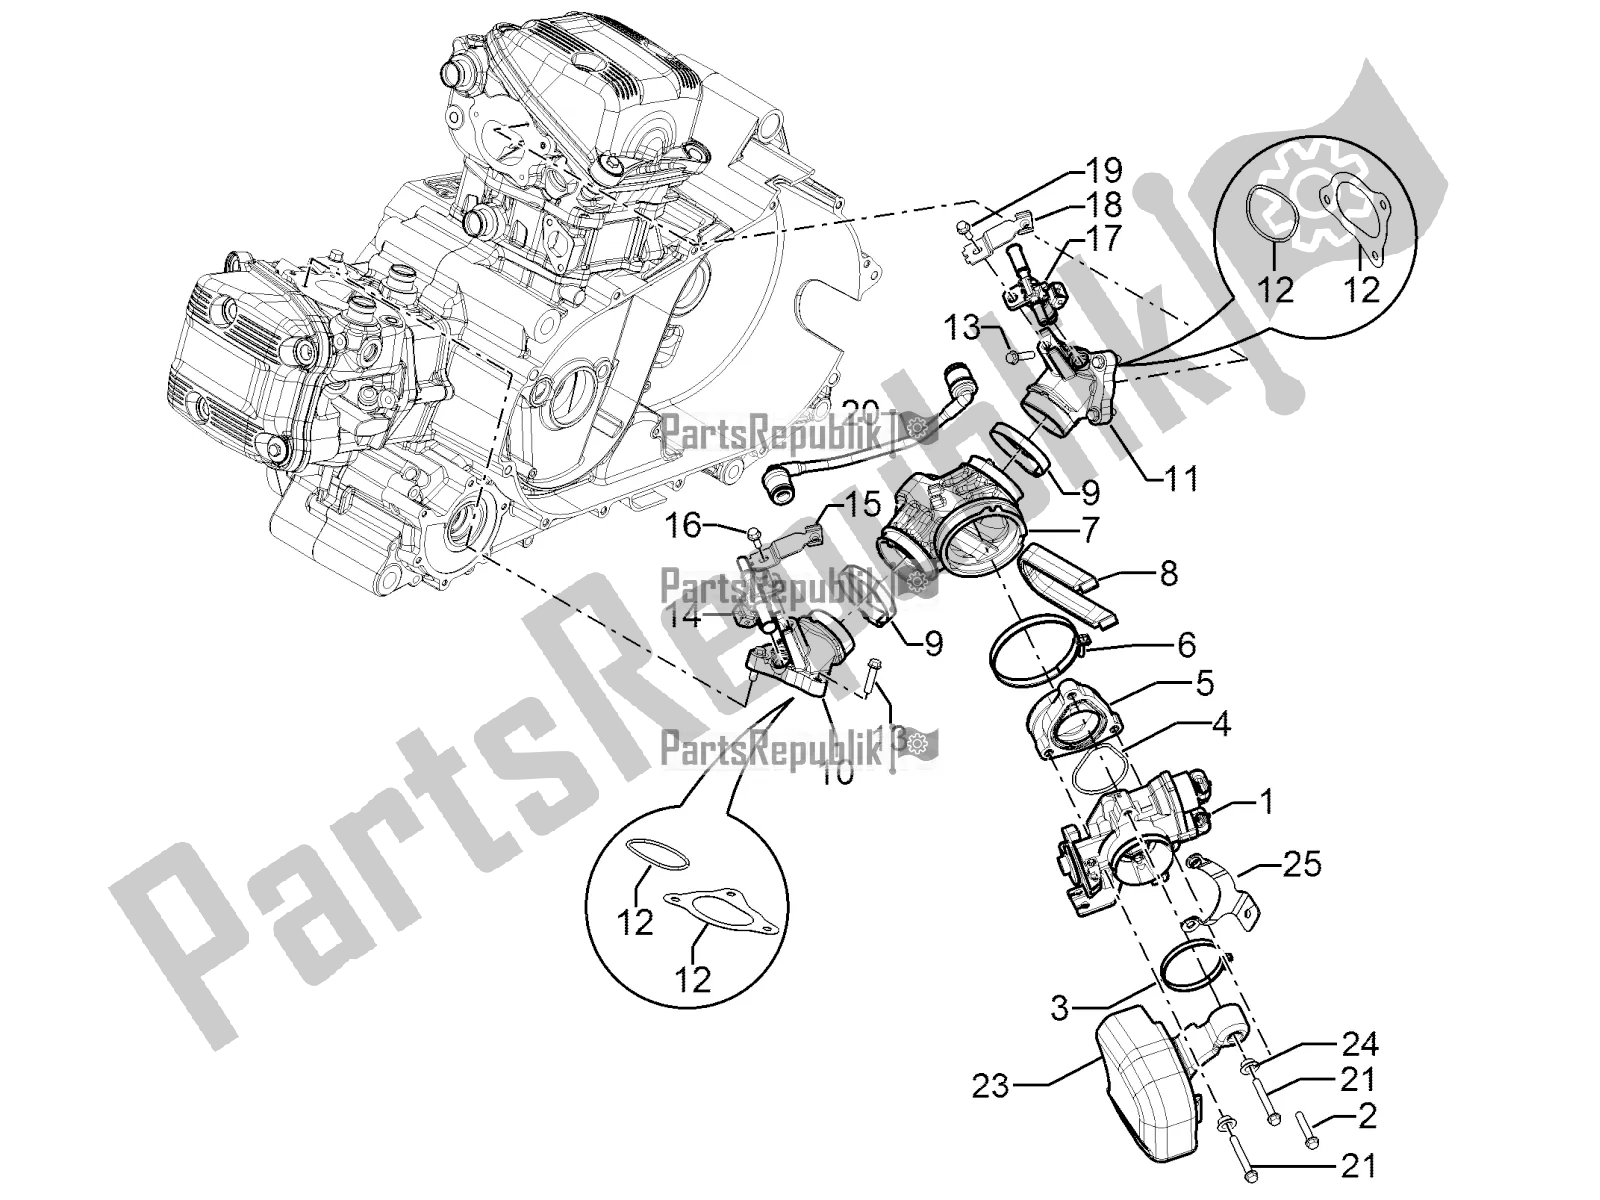 All parts for the Throttle Body - Injector - Induction Joint of the Aprilia SRV 850 2019